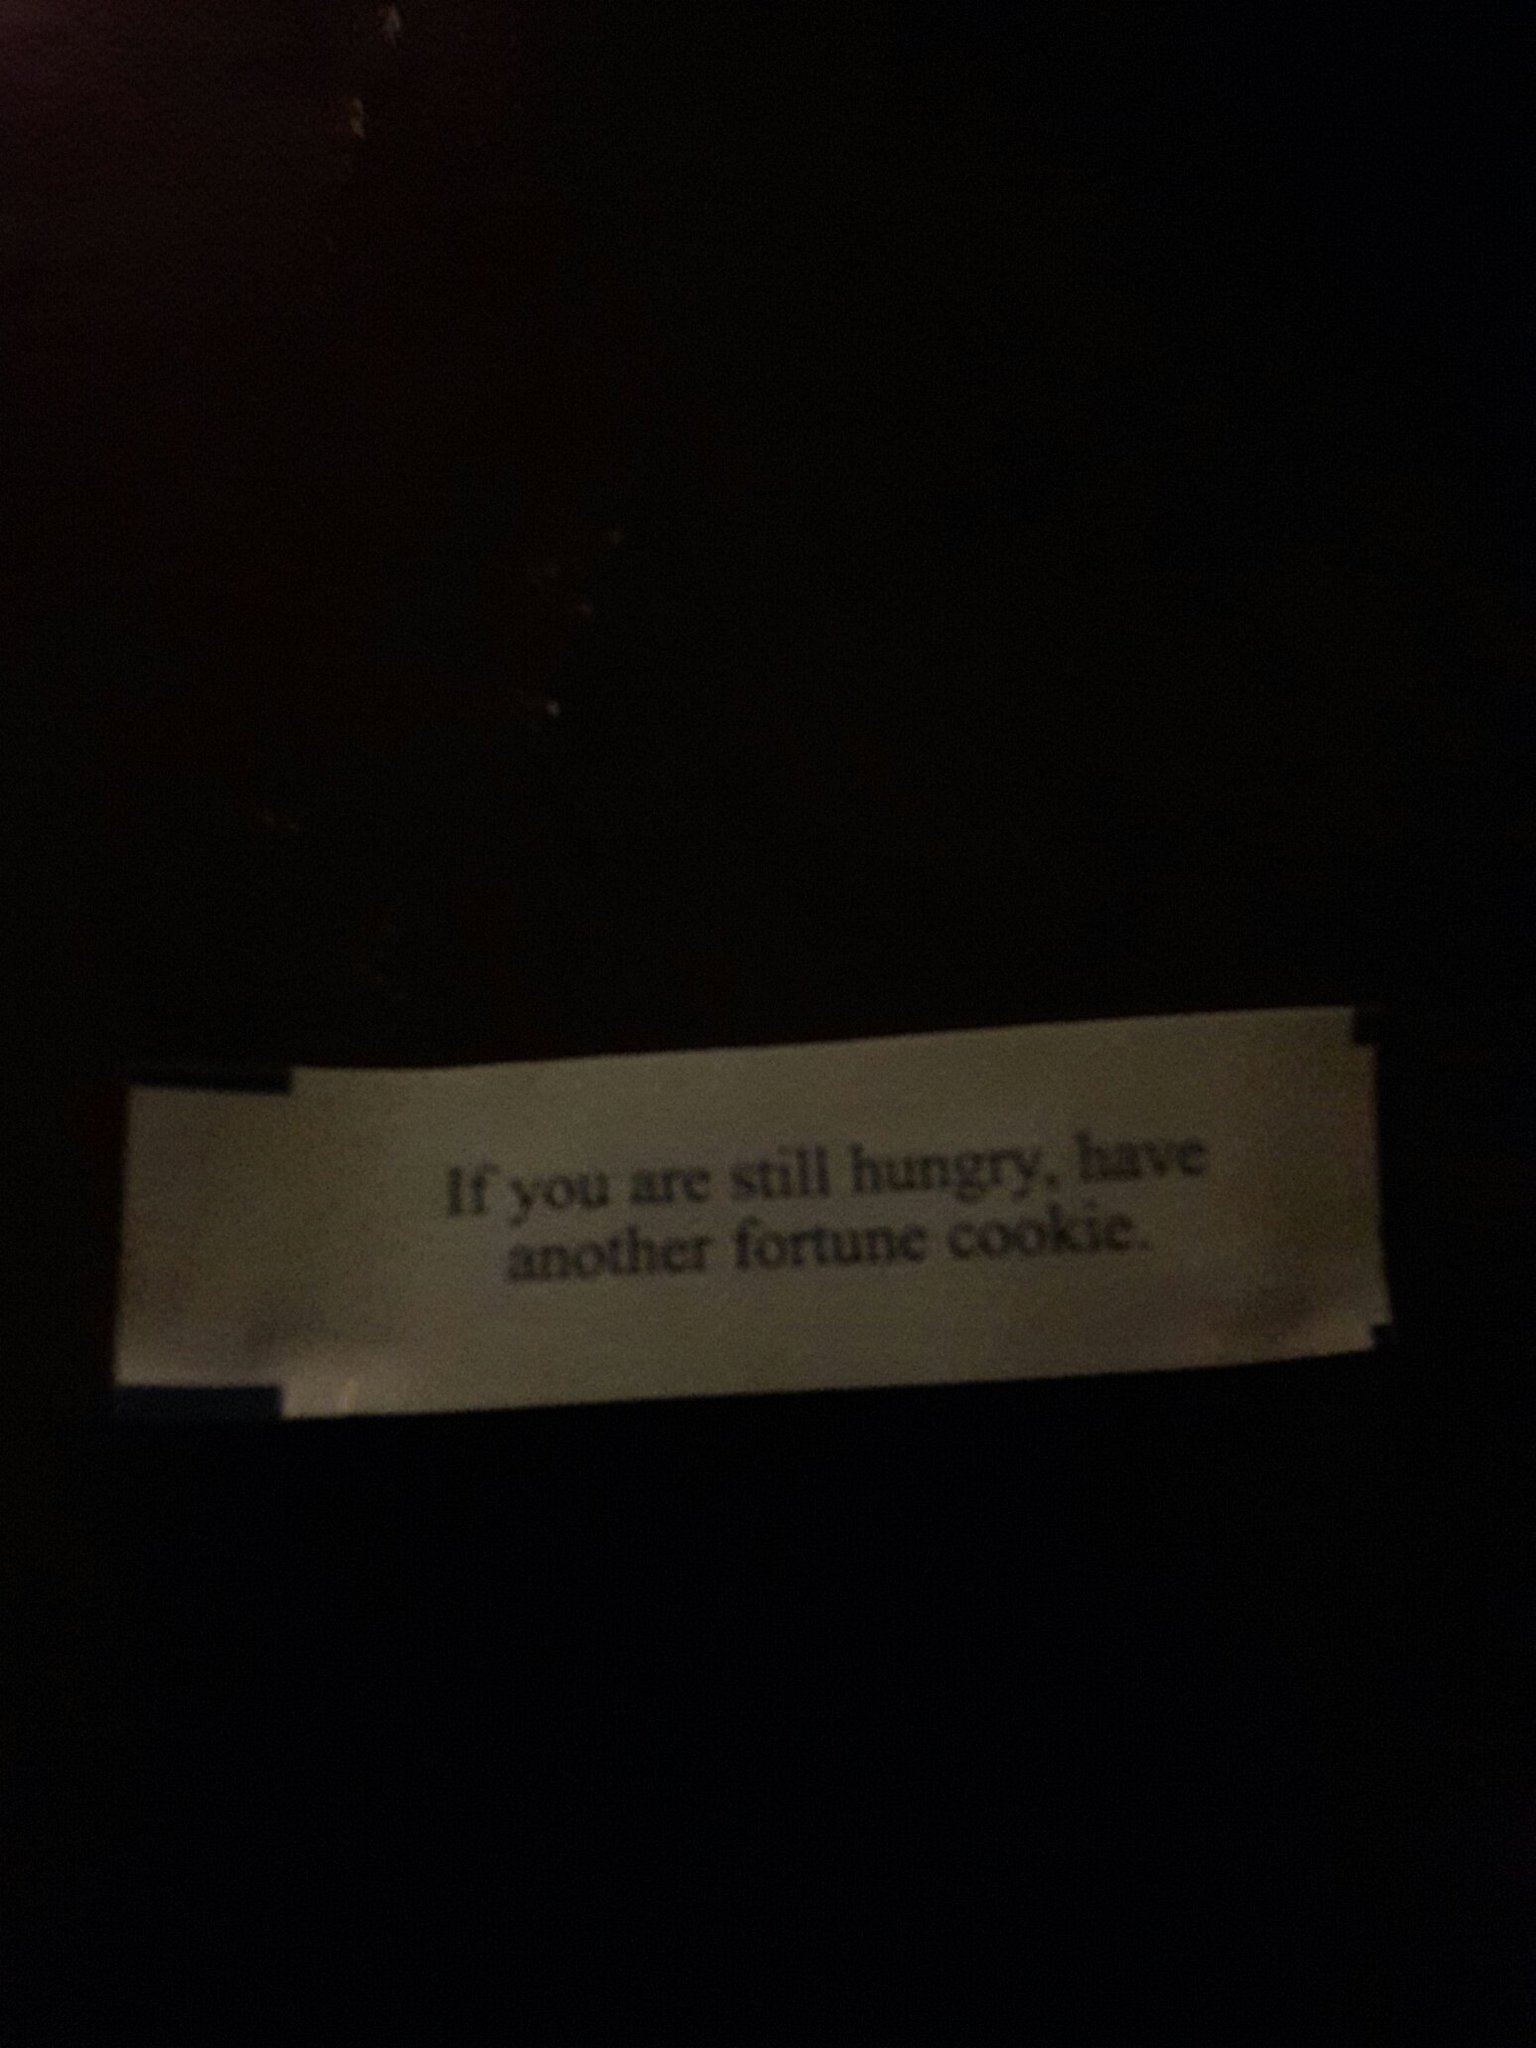 Just ate my fortune cookie and saw this - meme